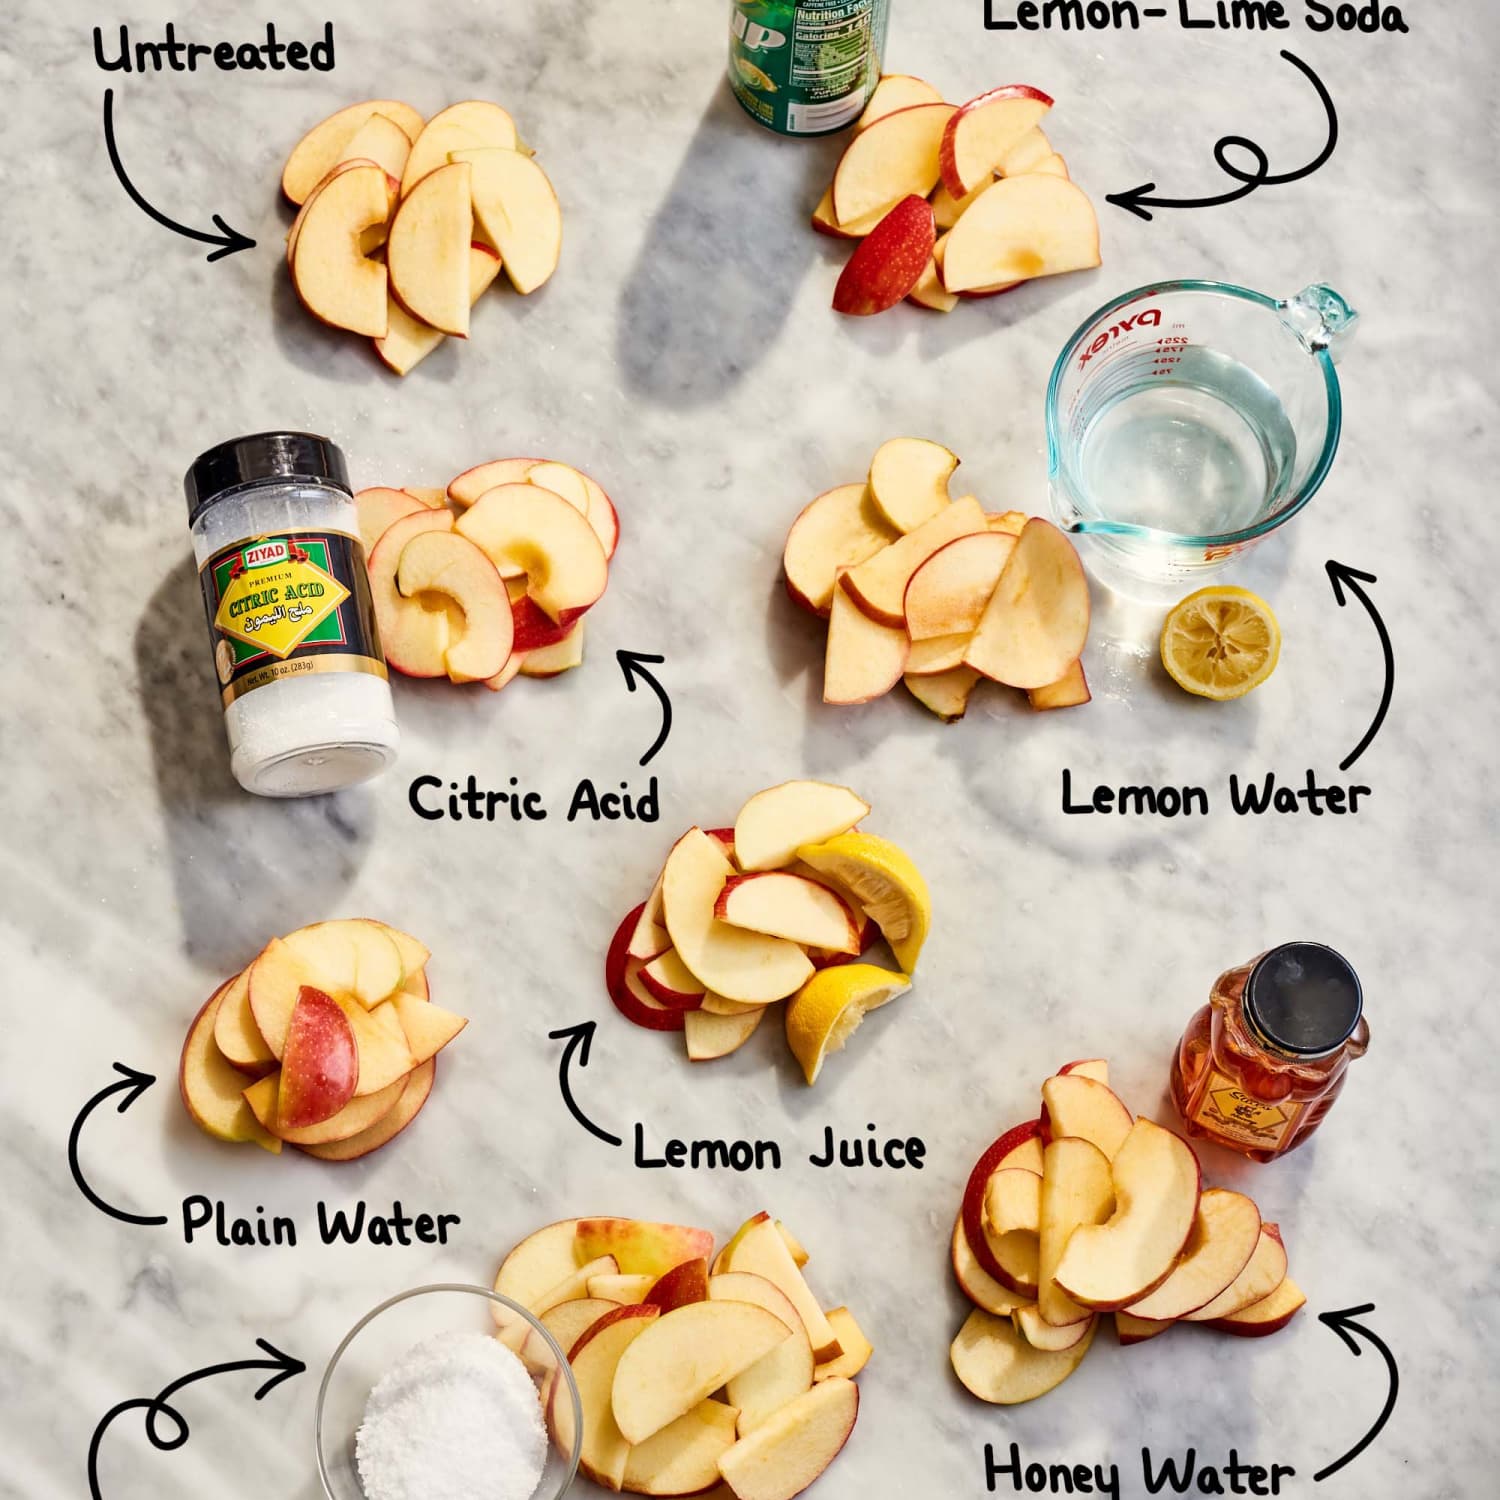 Why do apple slices turn brown after being cut?